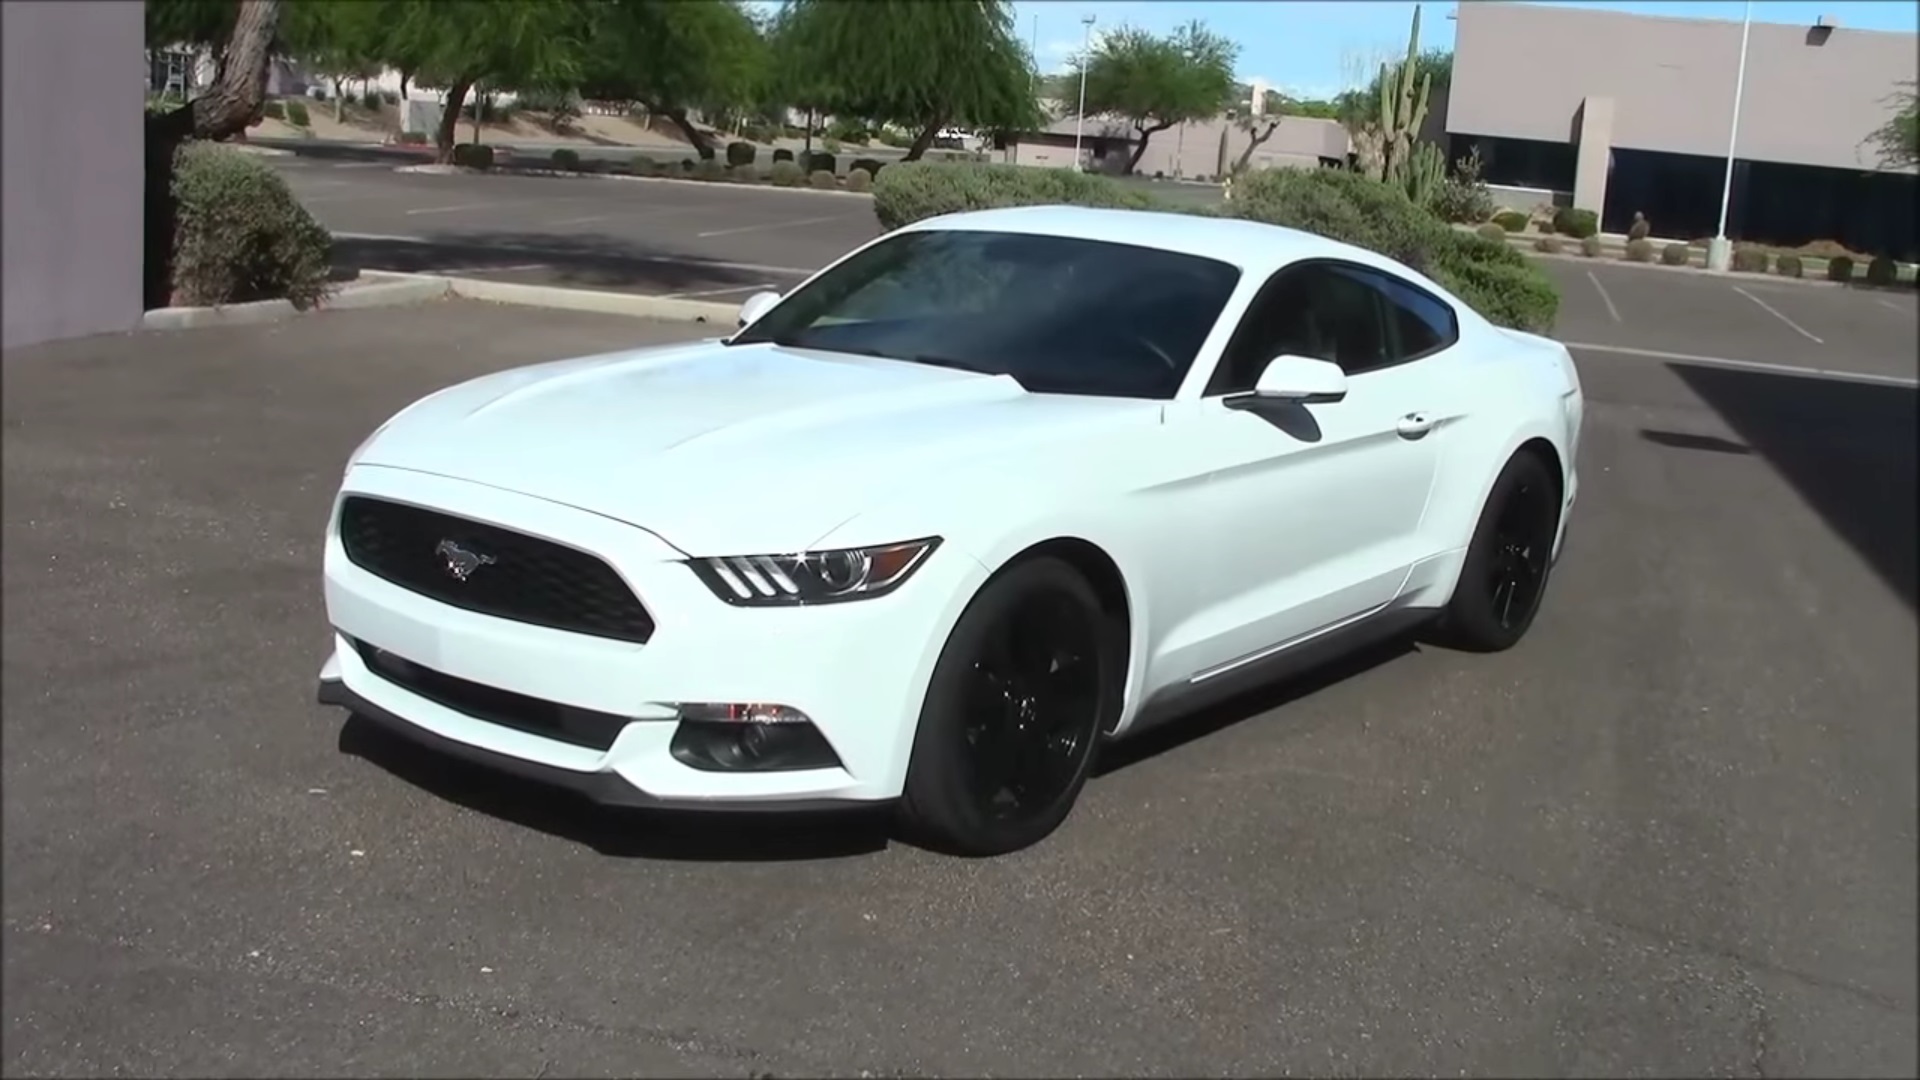 Video: 2015 Ford Mustang EcoBoost -Performance & Fuel Consumption Test